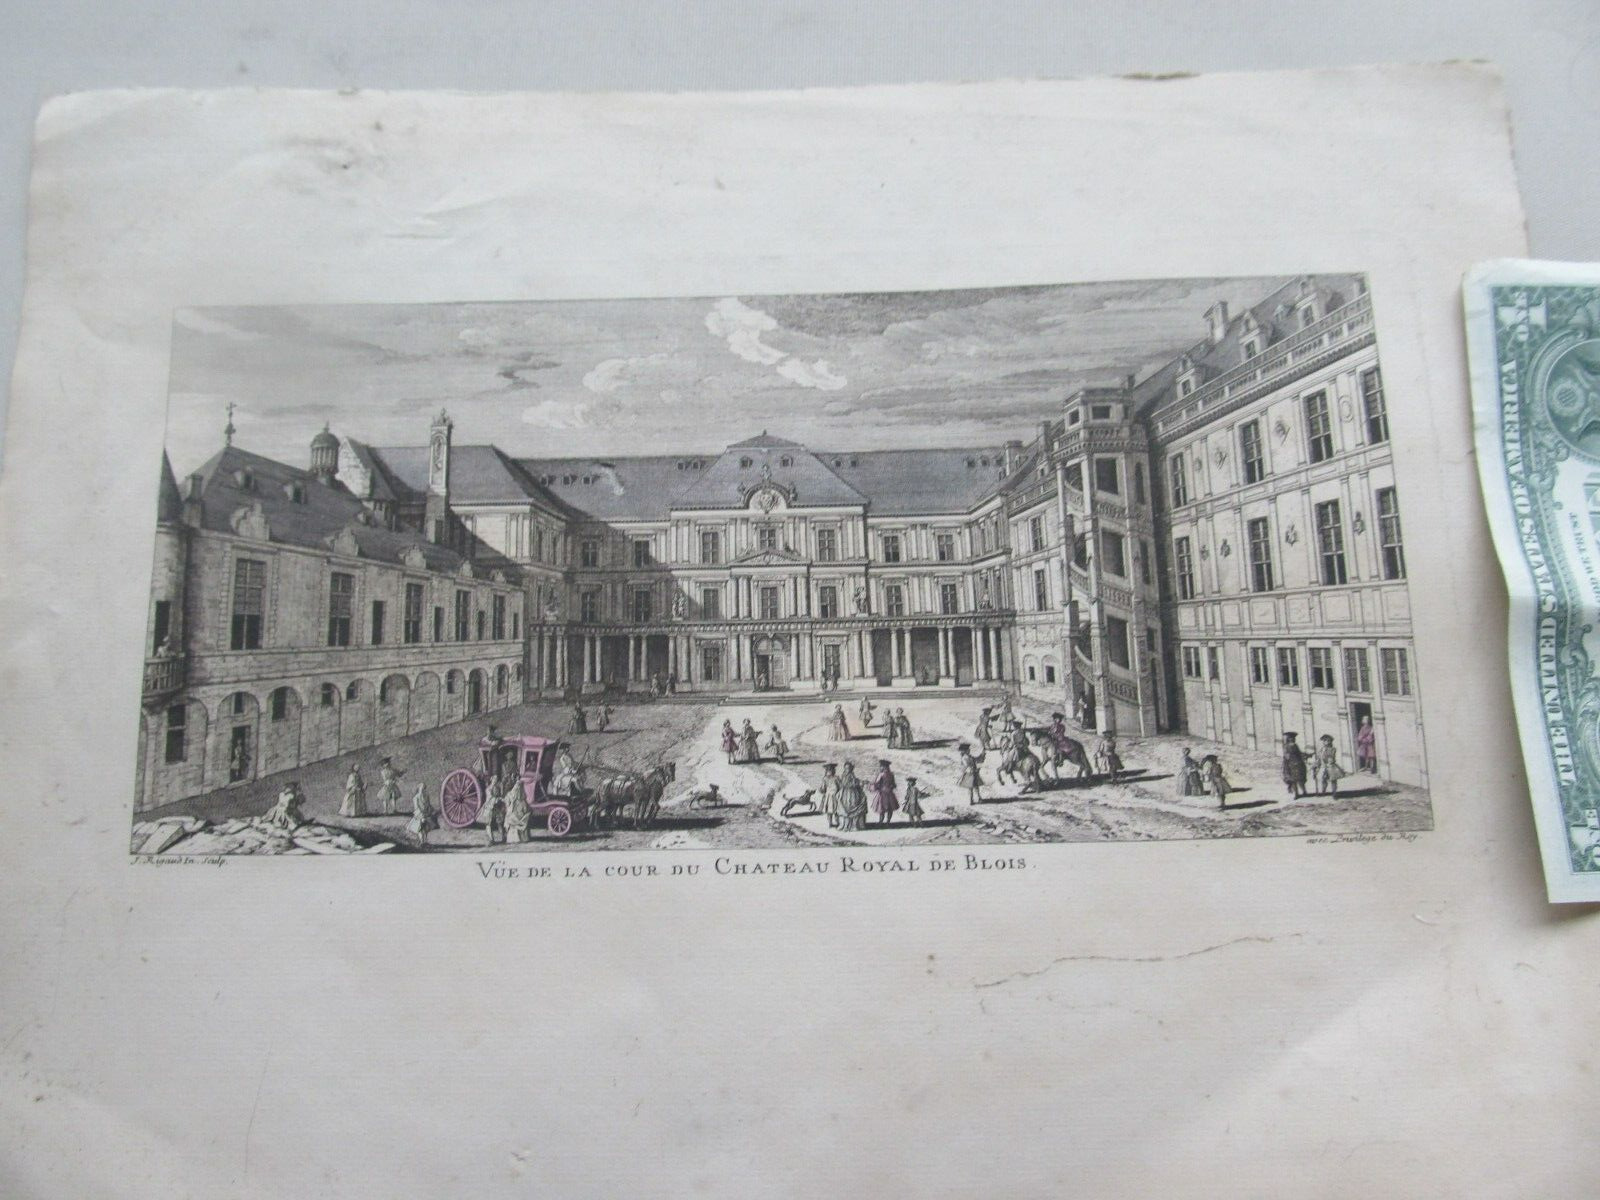 RARE, Very Early Antique French Print Engraving, c.1800, Chateau Royal de Blois